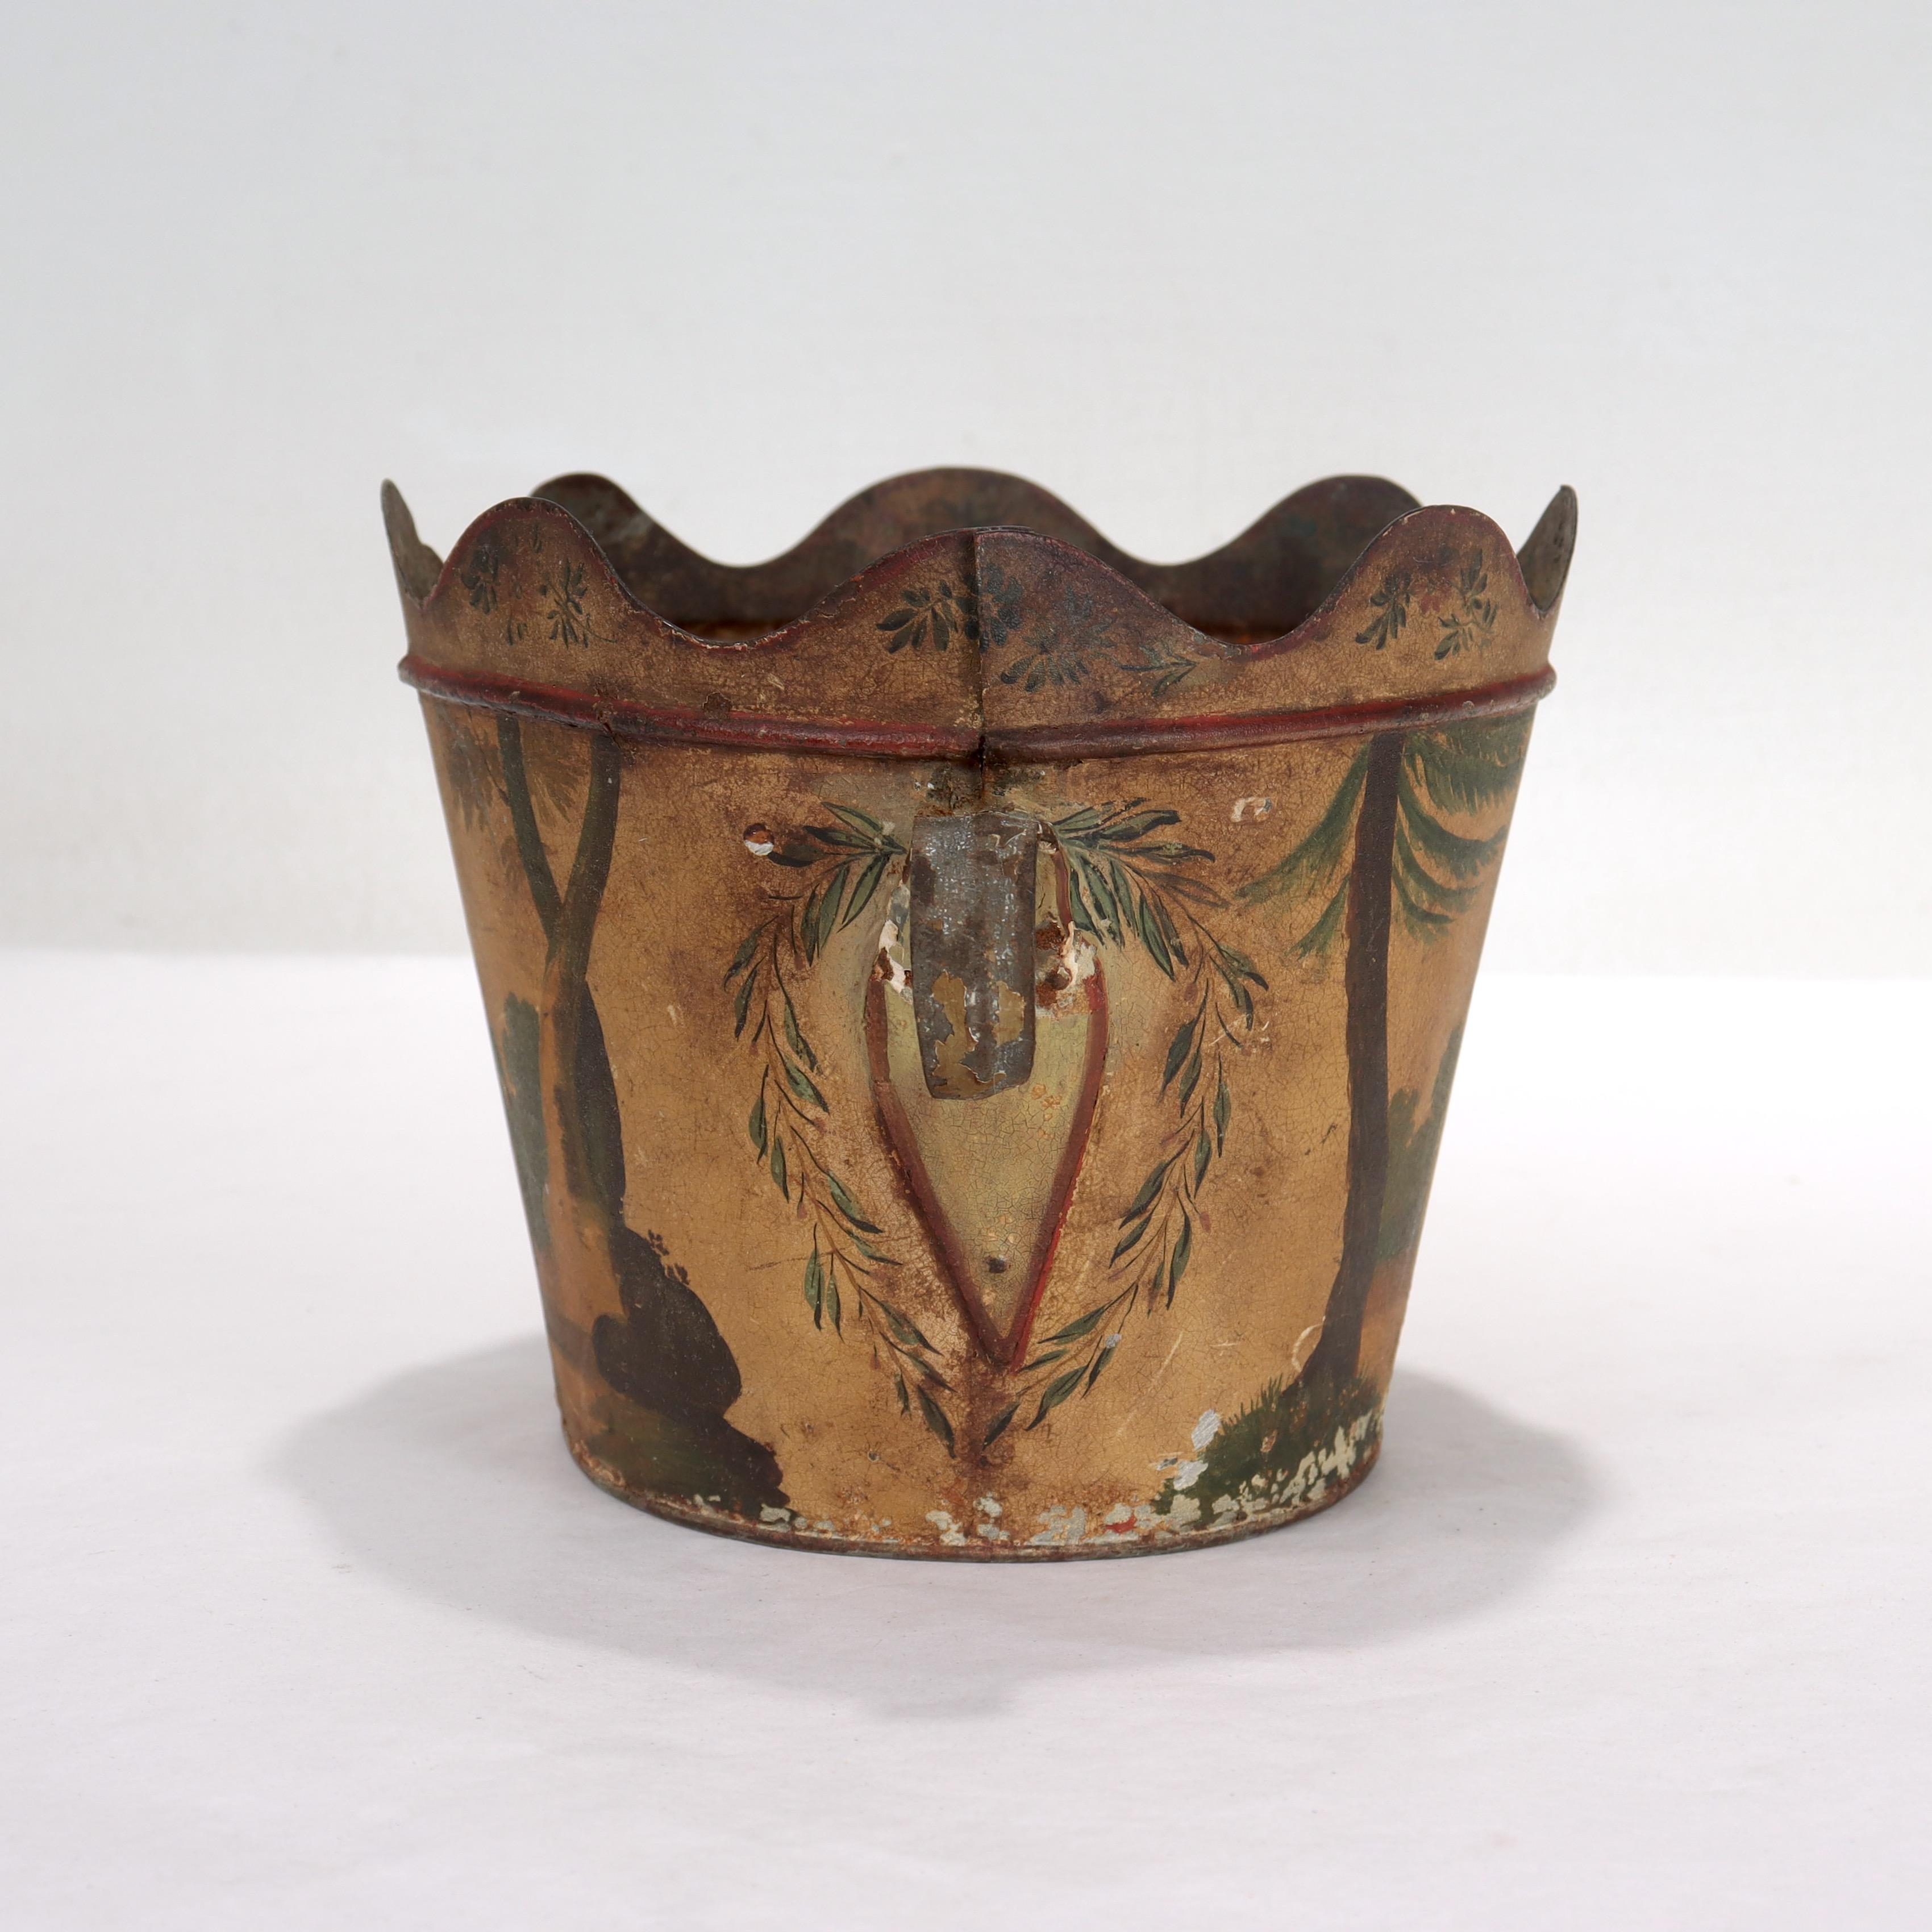 Empire Revival Antique French Toleware Cachepot or Planter Painted with a Don Quixote Scene For Sale